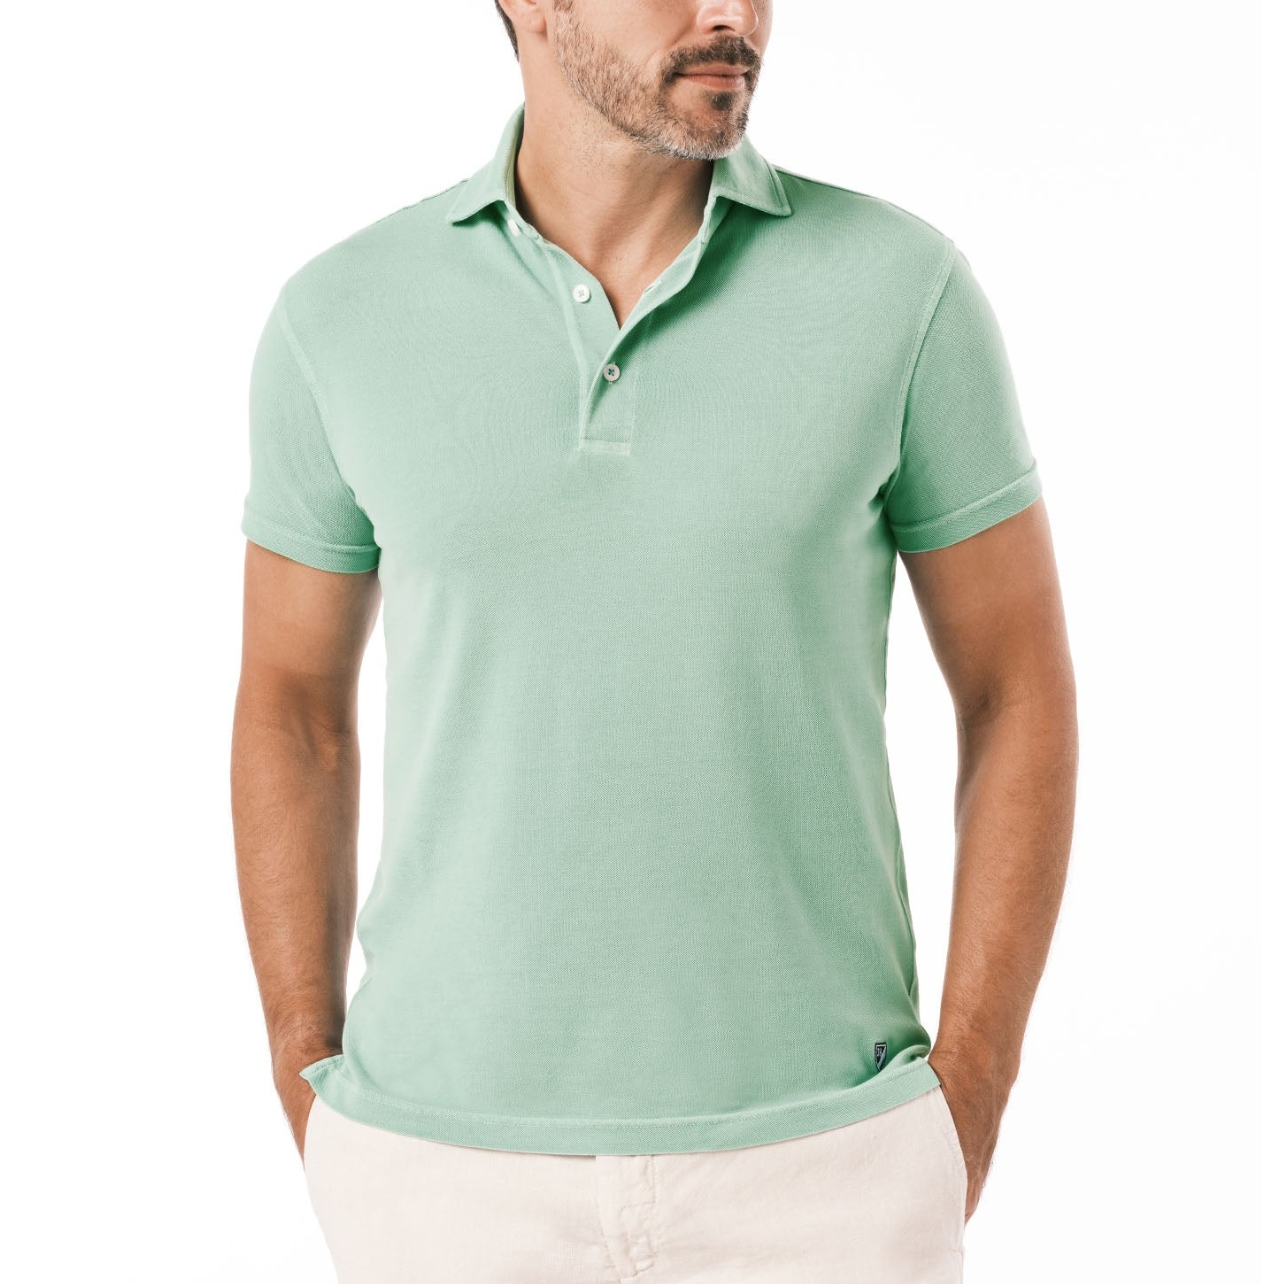 You can never go wrong with a classic polo. Freshen up your go-to essential with Cremieux’s supima cotton garment-dyed pique polo. It’s okay to pack one for every event.